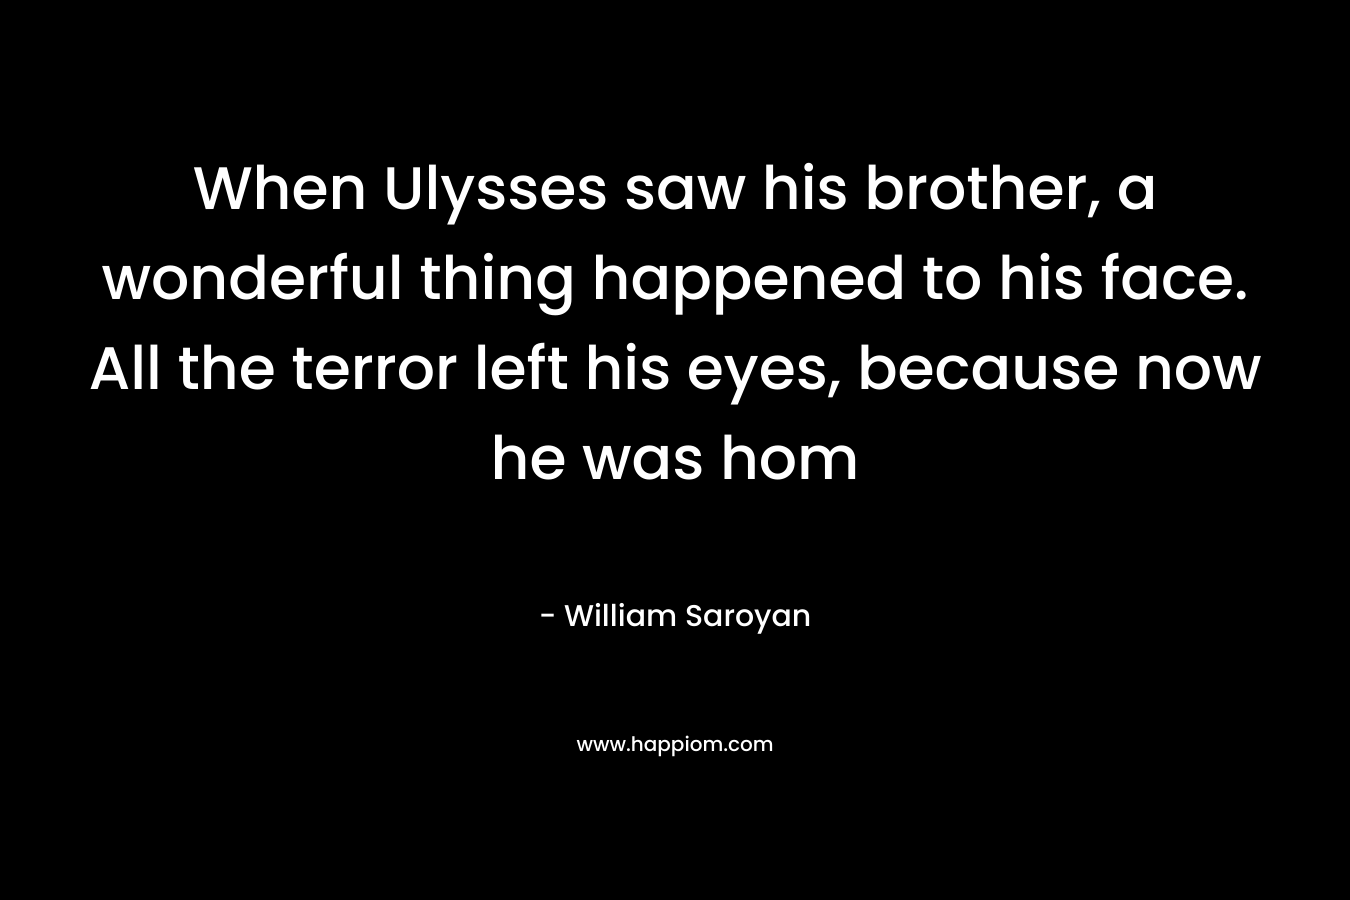 When Ulysses saw his brother, a wonderful thing happened to his face. All the terror left his eyes, because now he was hom